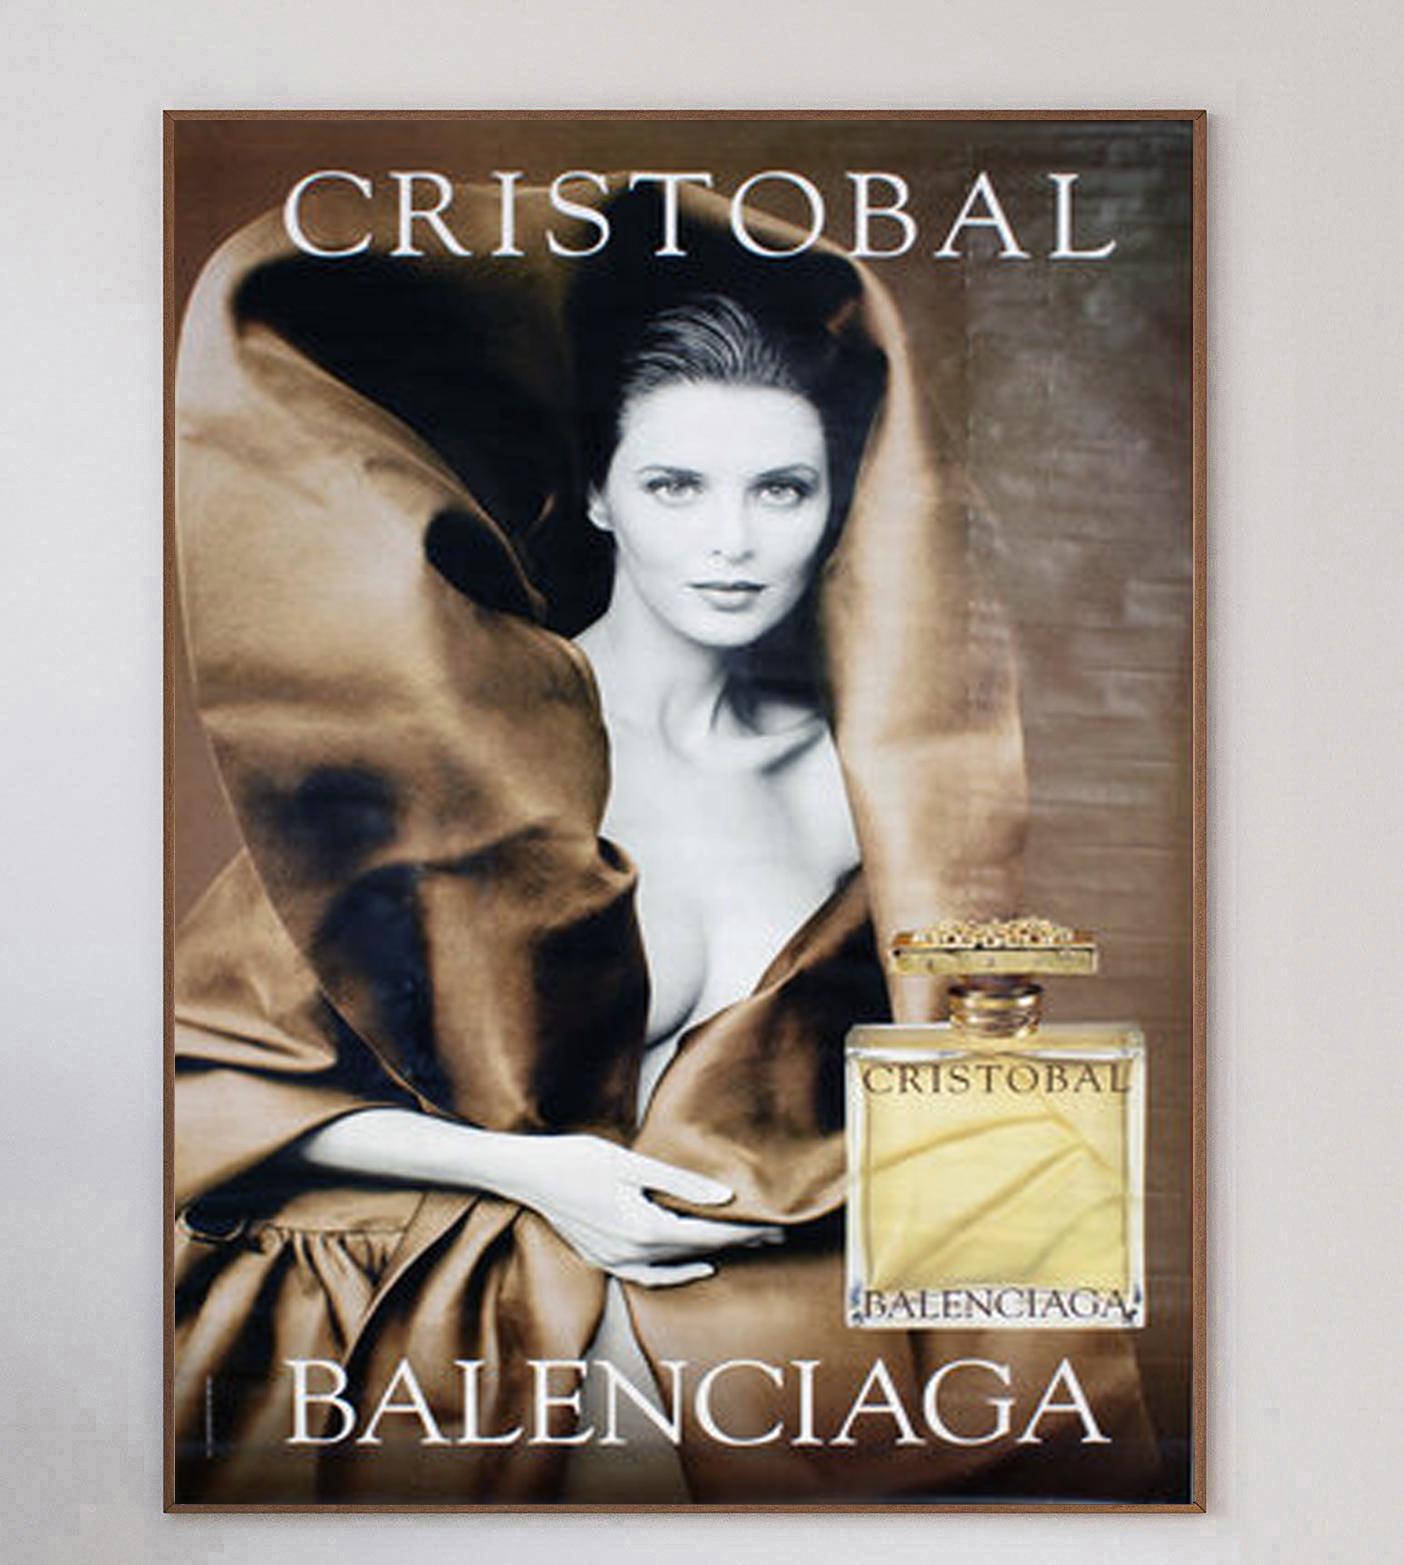 Extra-large poster promoting the Balenciaga fragrance, Cristobal - the namesake of the founder. This stunning and rare poster features model and actress Isabella Rossellini and was released in 1999.

Cristobal Balenciaga founded the luxury fashion